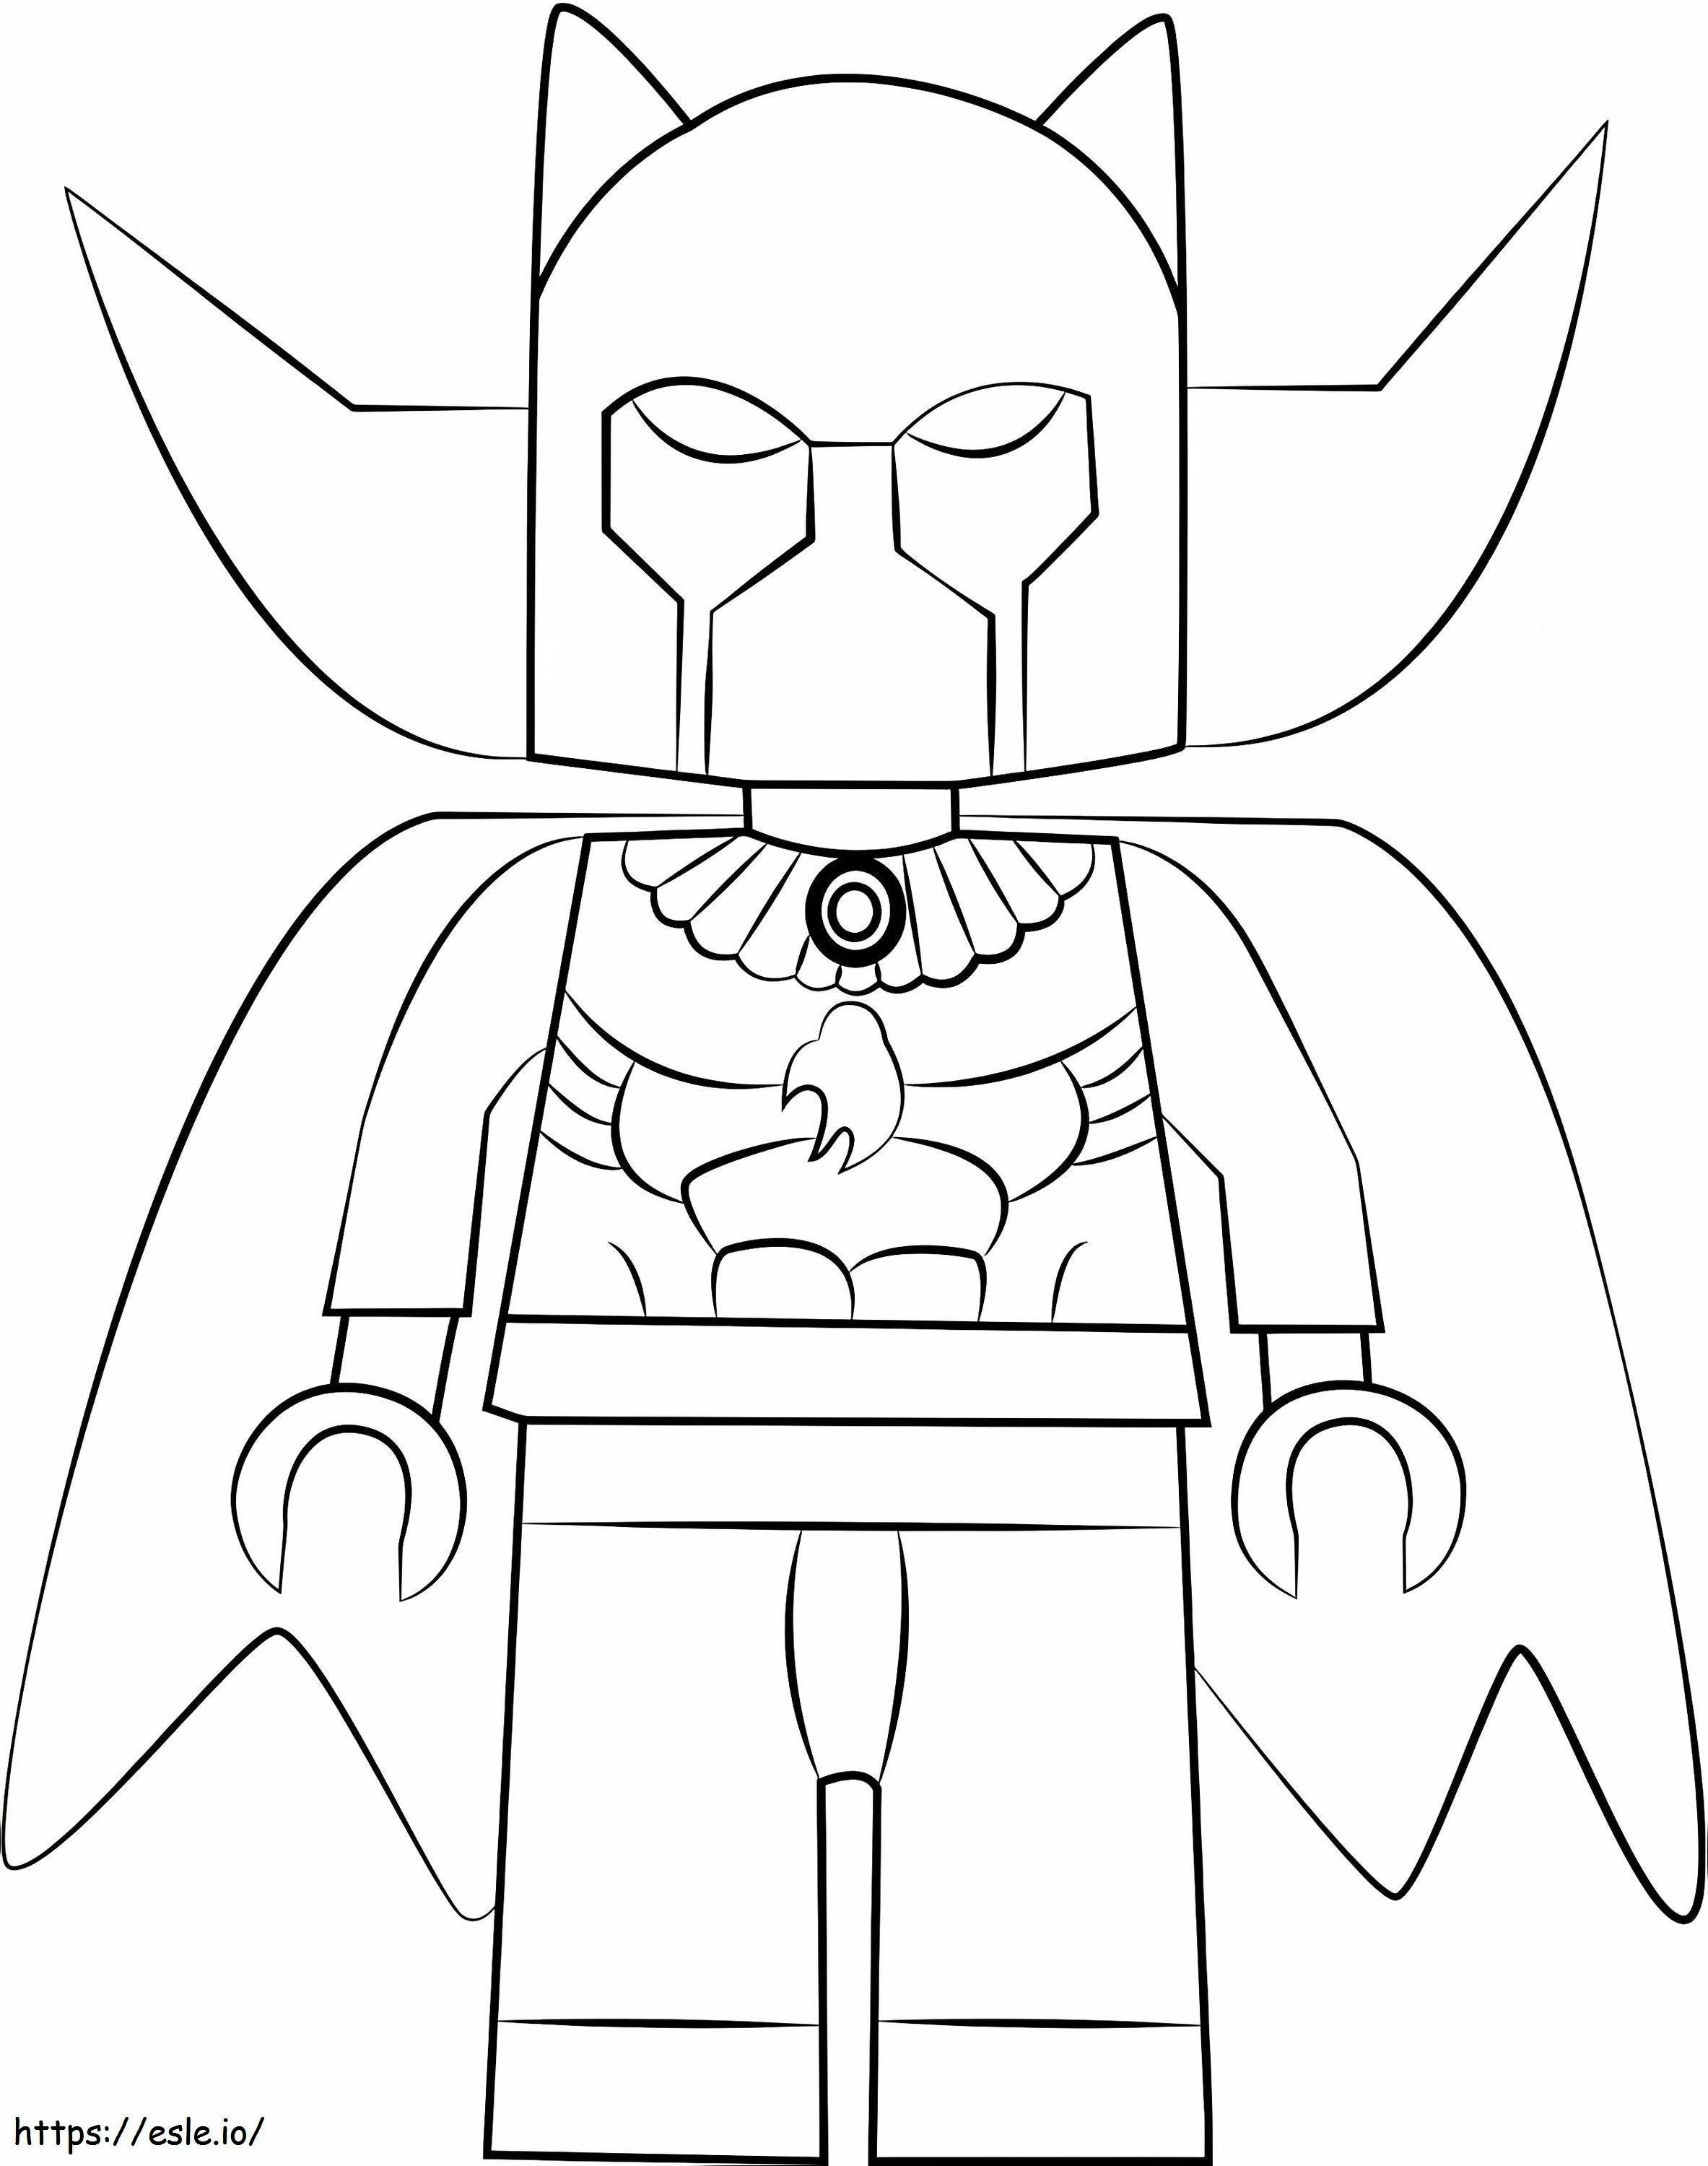 1541984028 Lego Black Panther coloring page